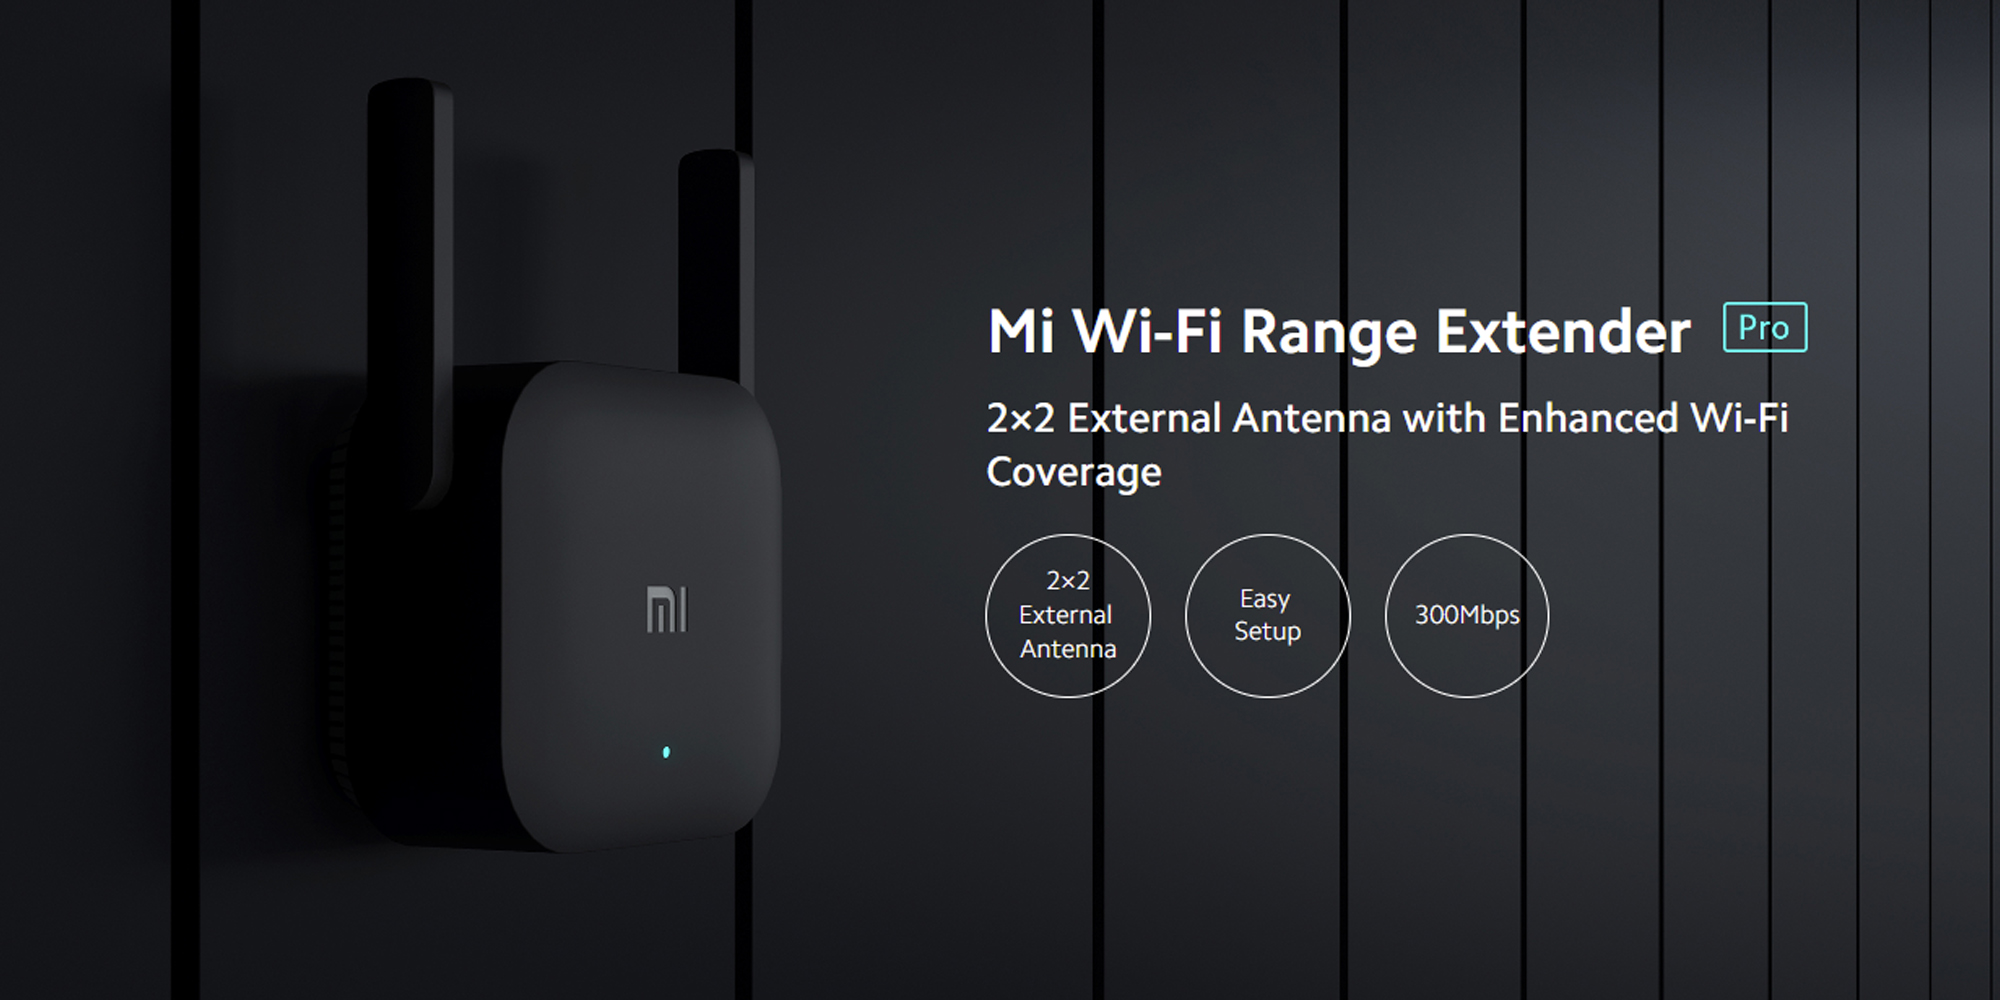 Xiaomi Mi Wi-Fi Range Extender Pro: 2.4GHz Wi-Fi Extender with 2x2 External Antennas, Up to 300Mbps Speed, Connects up to 16 Devices